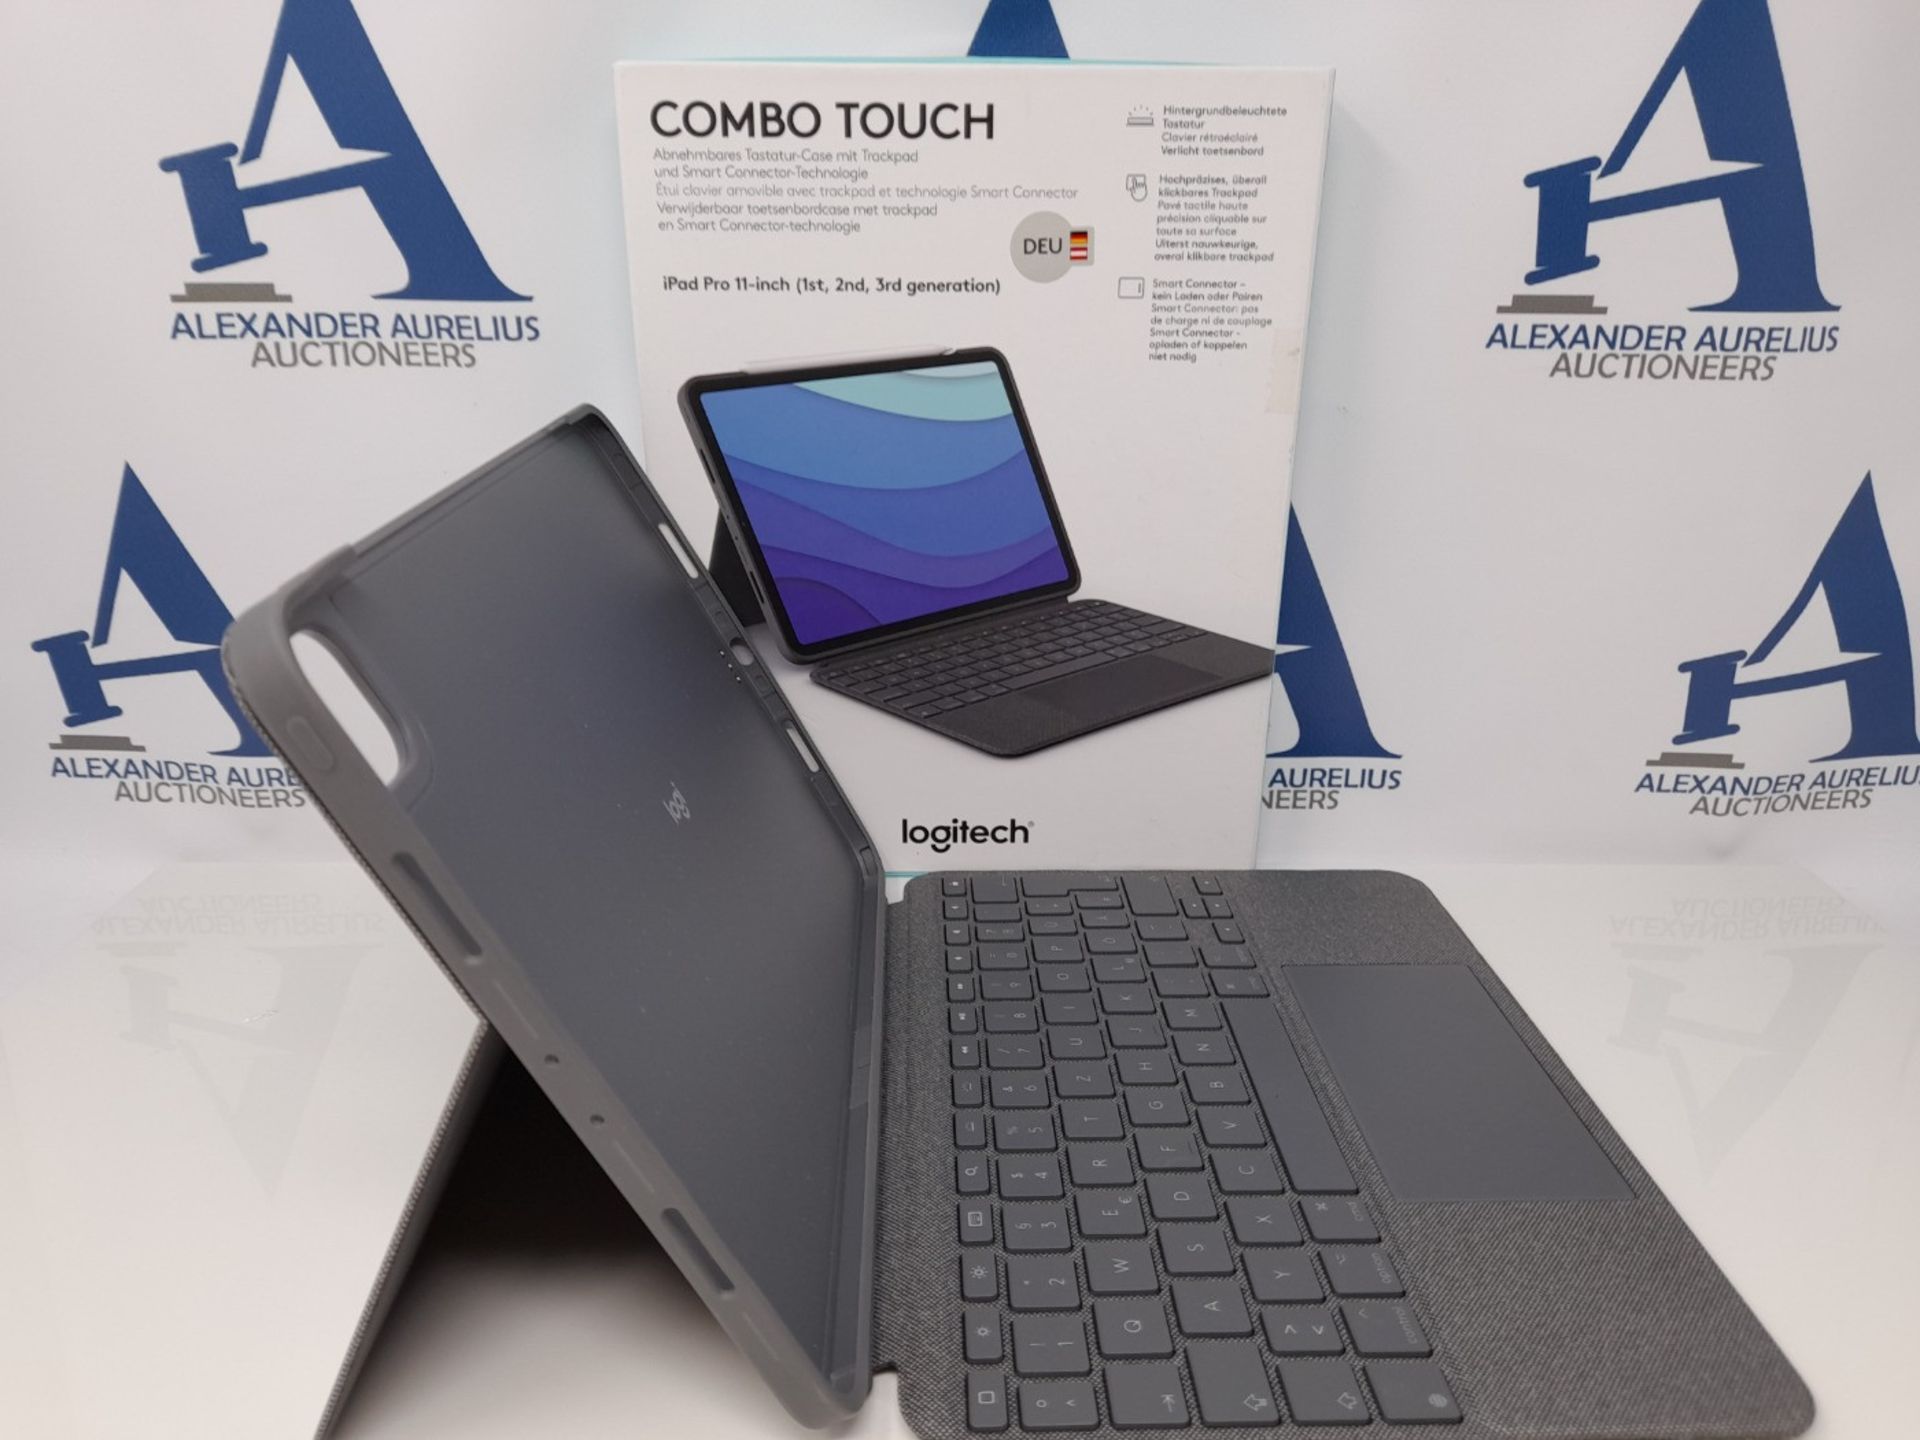 RRP £145.00 Logitech Combo Touch Keyboard Case for iPad Pro 11 inch (1st, 2nd and 3rd generation) - Image 2 of 2